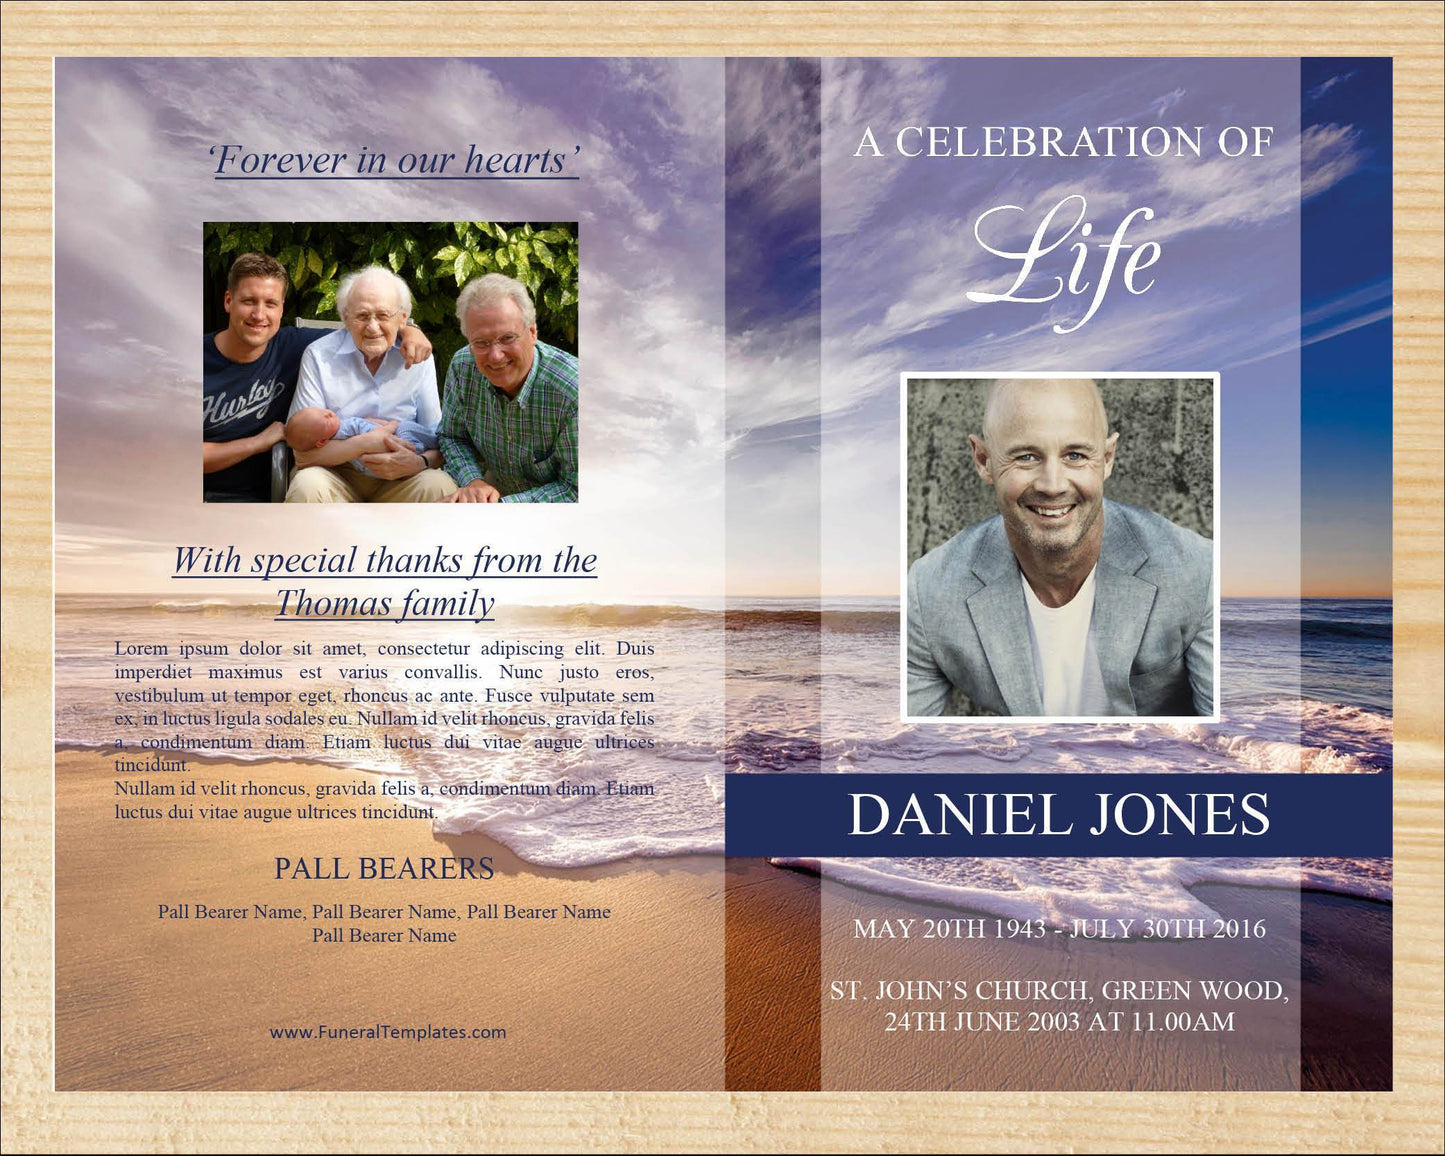 8 Page Waves Funeral Program Template + Prayer Card